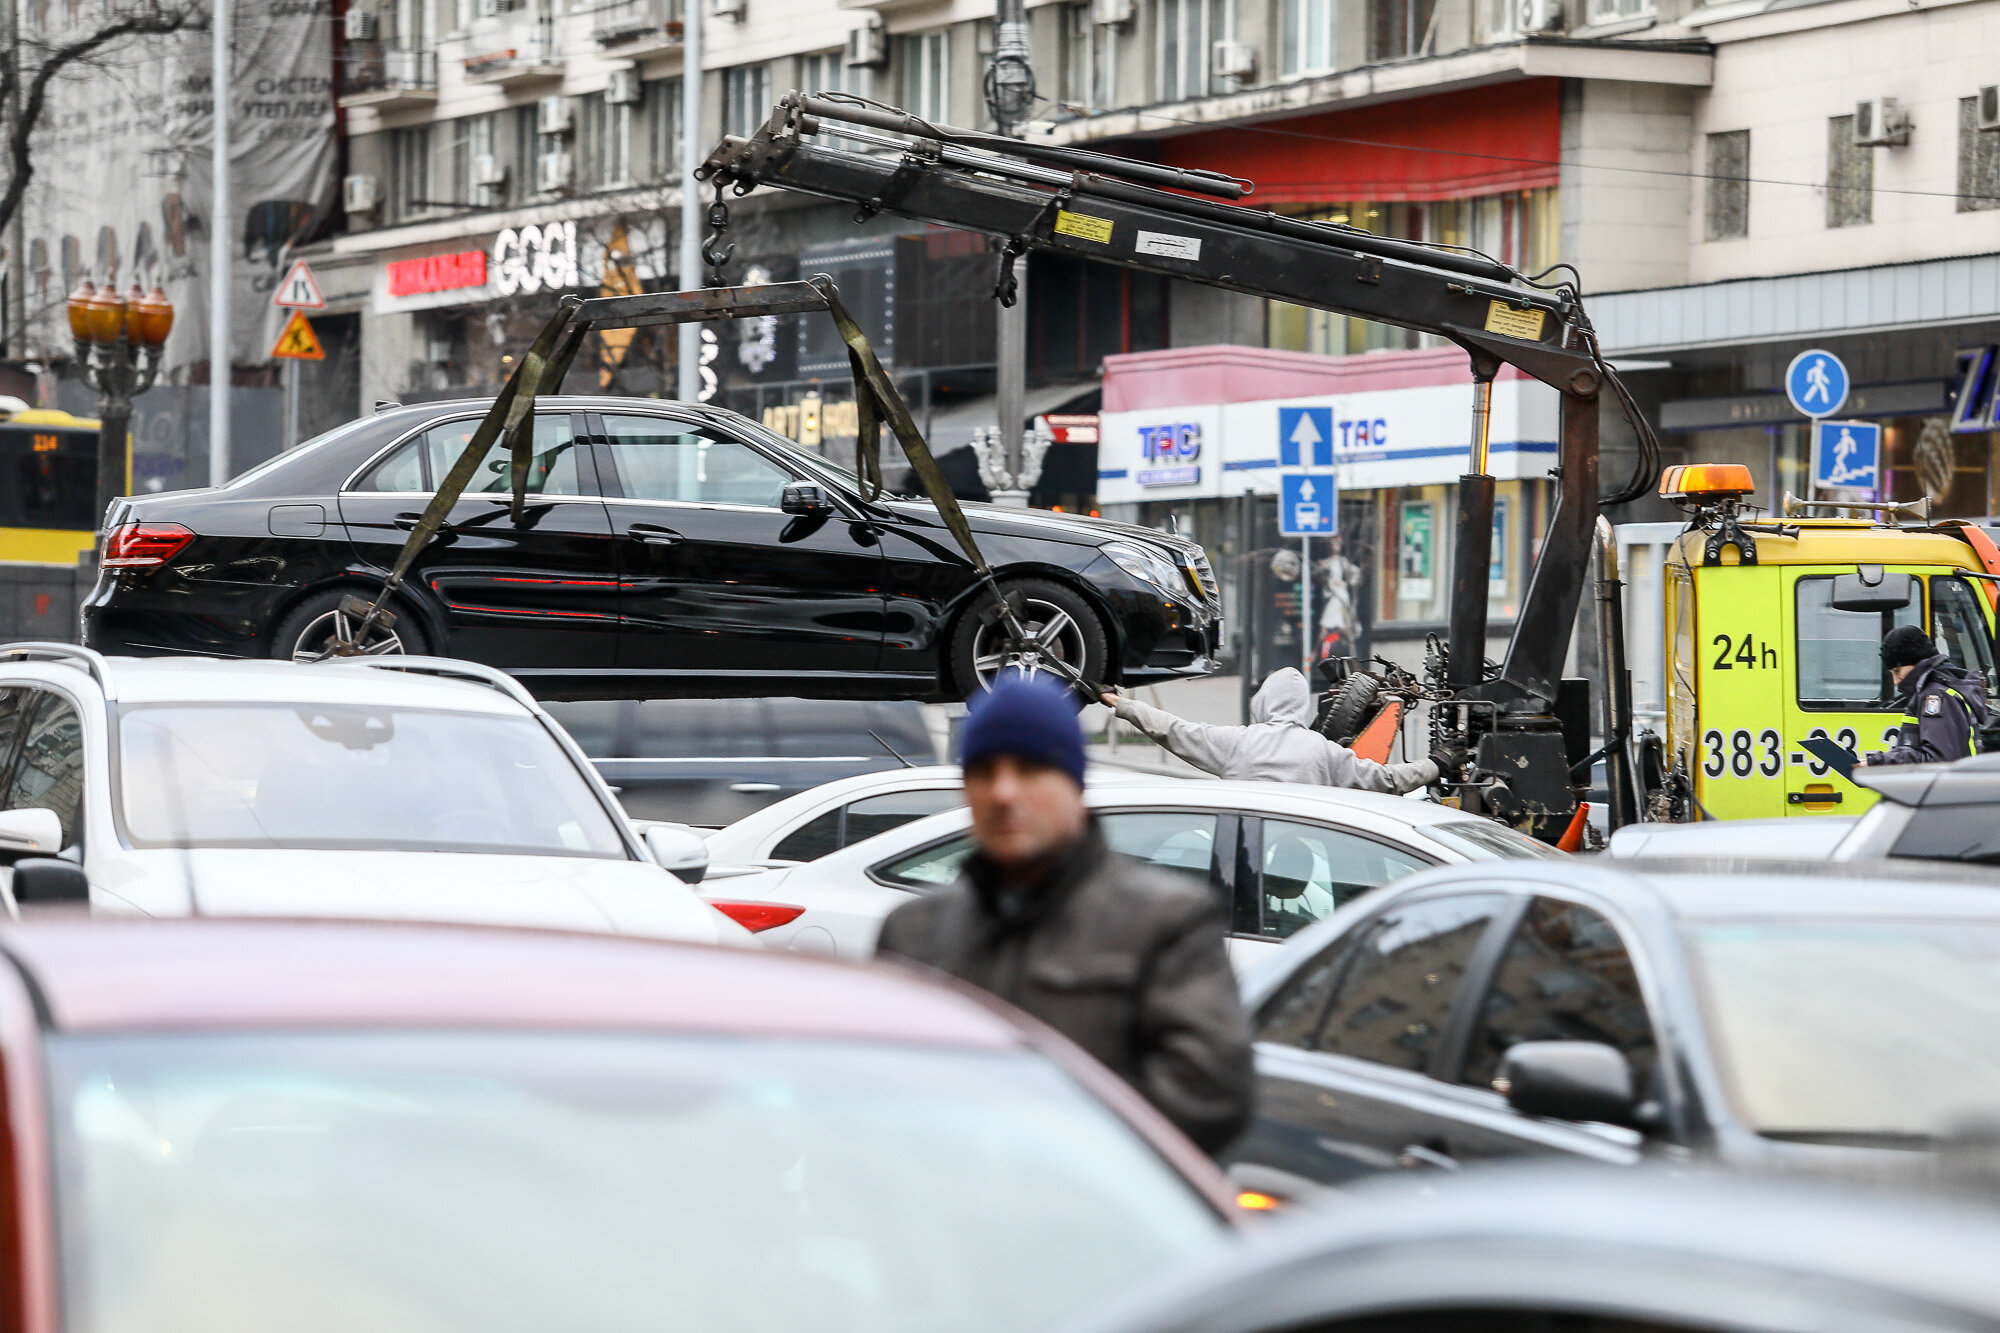 Visit Ukraine - Parking rules in Germany: why a car may be towed and fined